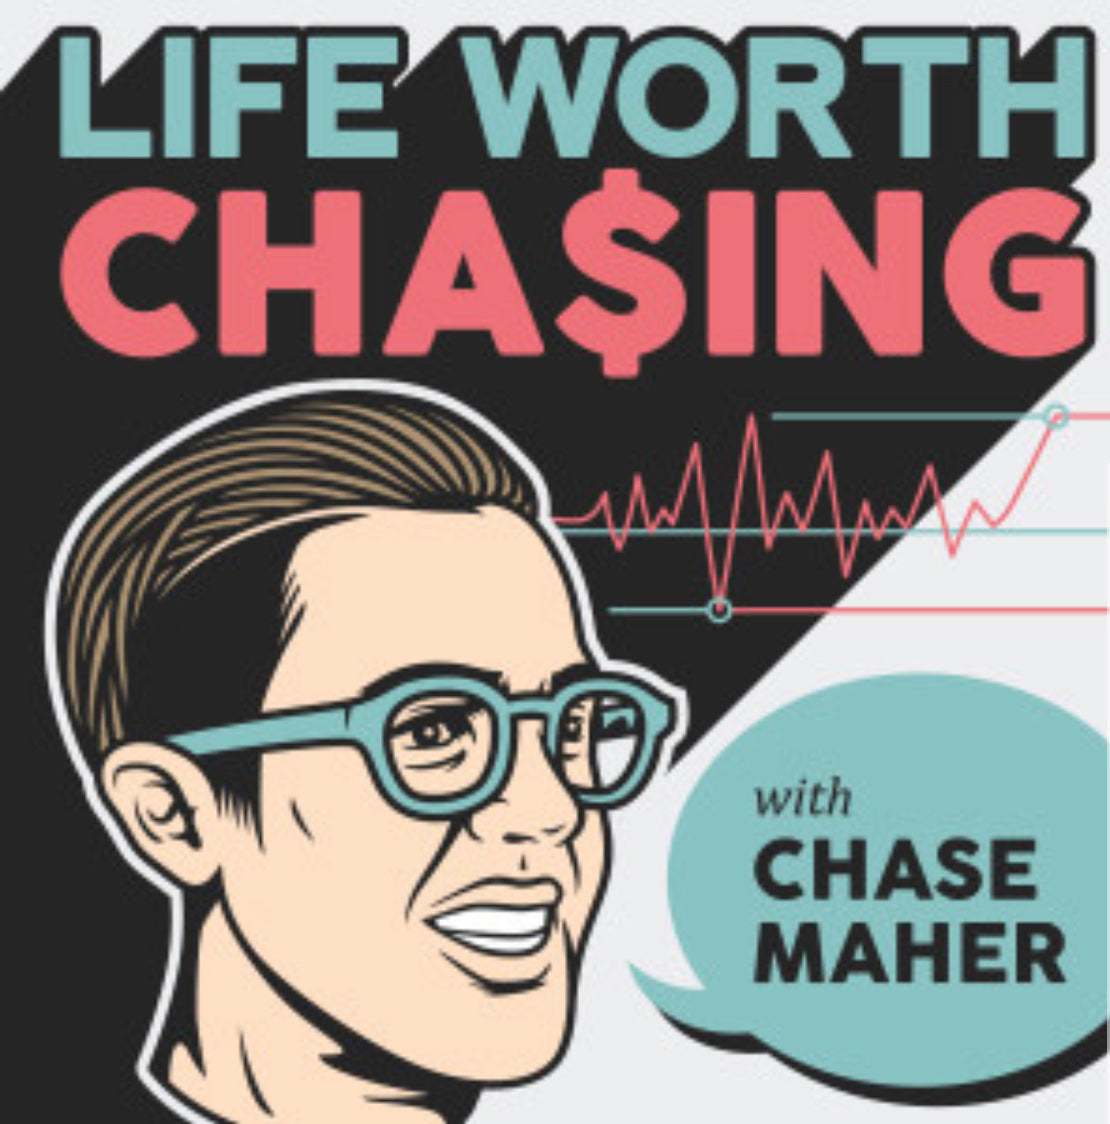 Life Worth Chasing Podcast : Financial Literacy and Investing with Beez